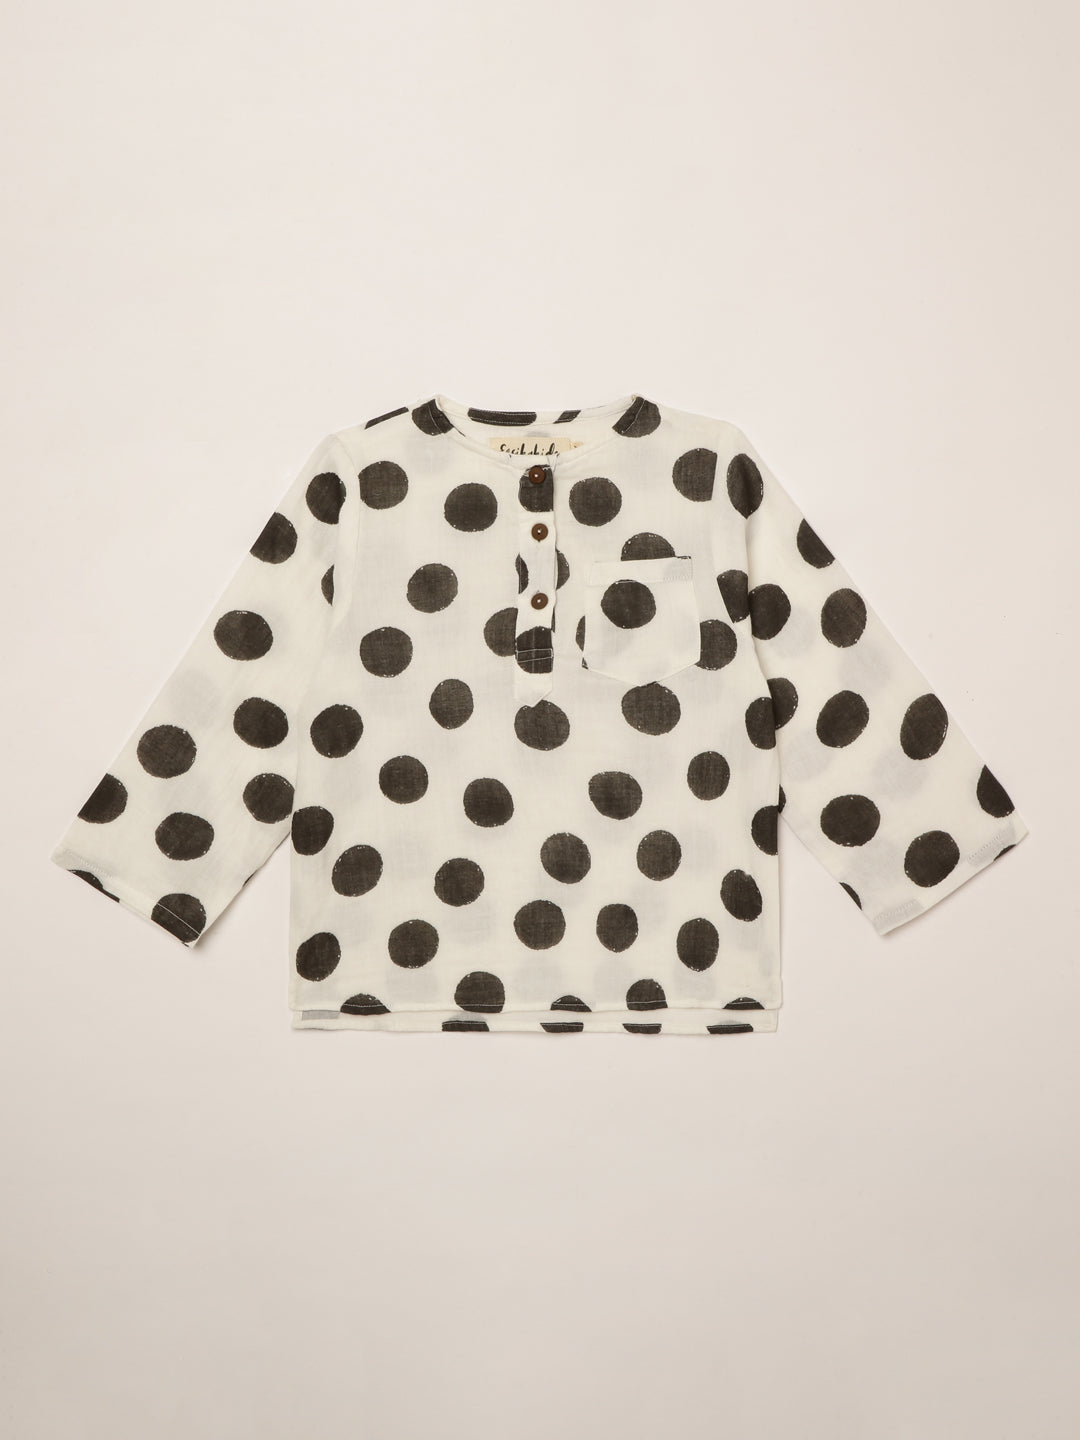 Boys cotton shirt in polka dots 1yr to 8 yrs - Front